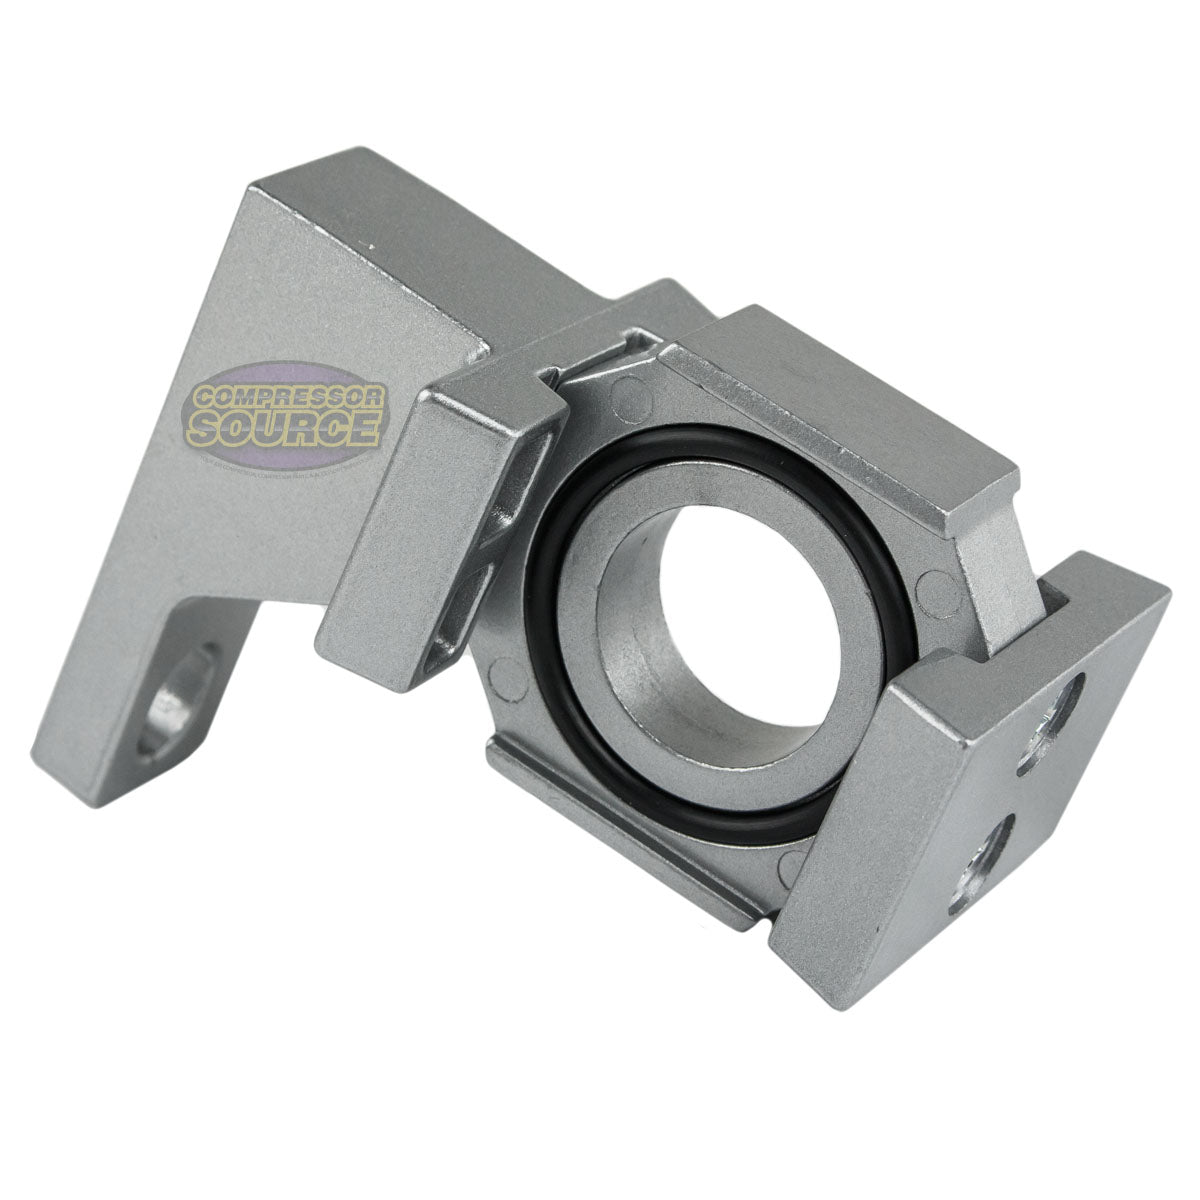 F9000 Series Filter Regulator Oiler Wall Bracket For Compressed Air Systems